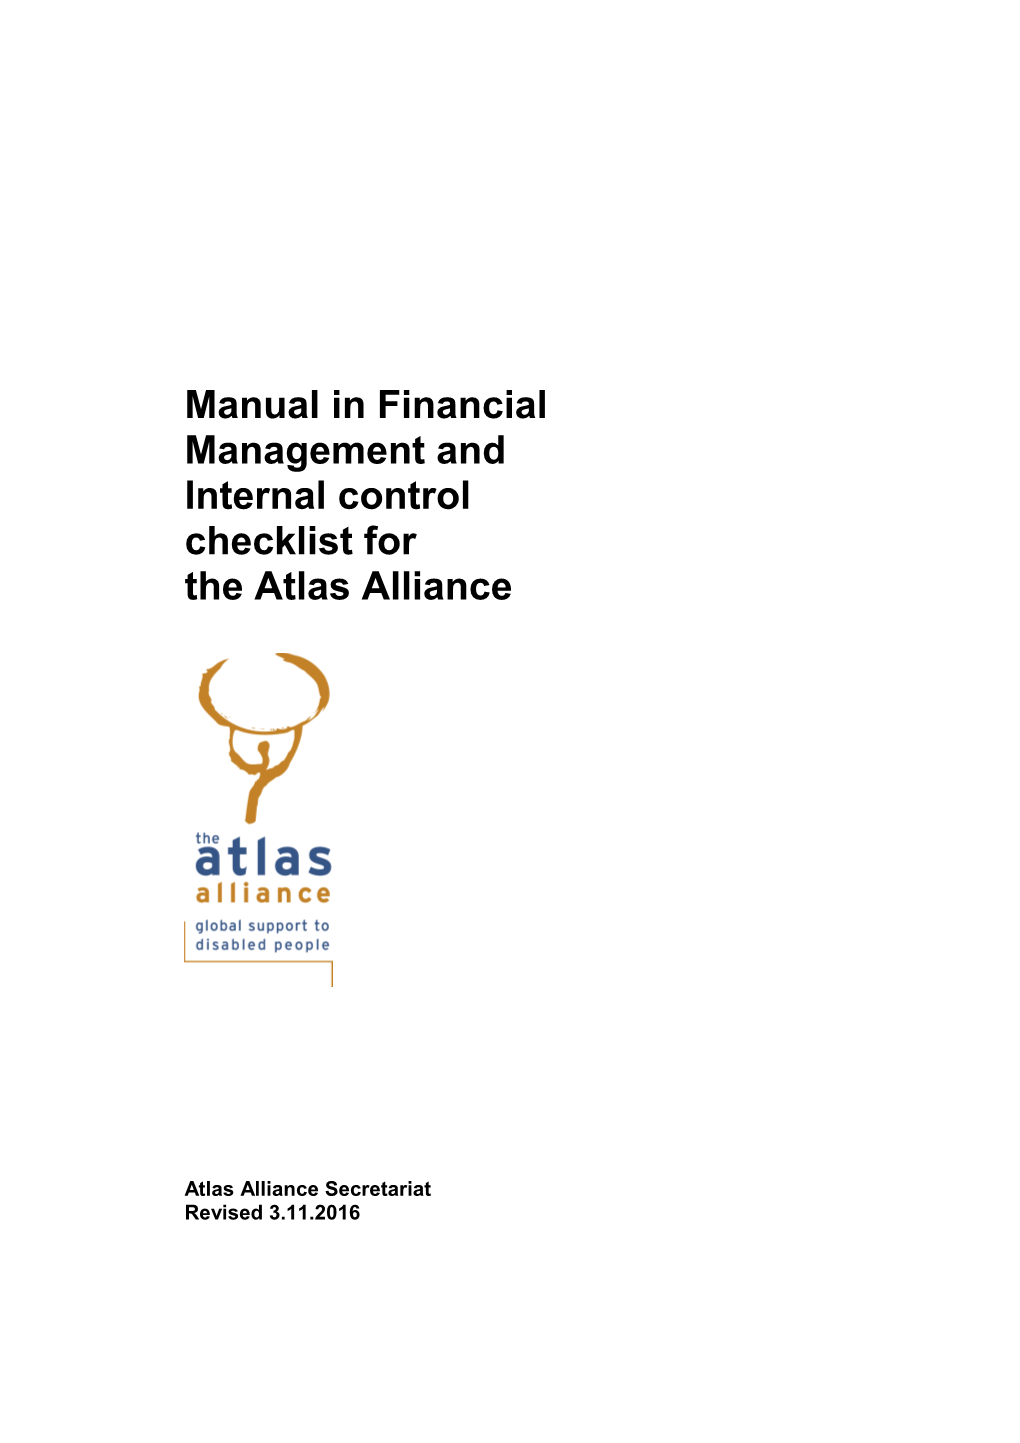 Manual in Project / Programme Management for the Atlas Alliance